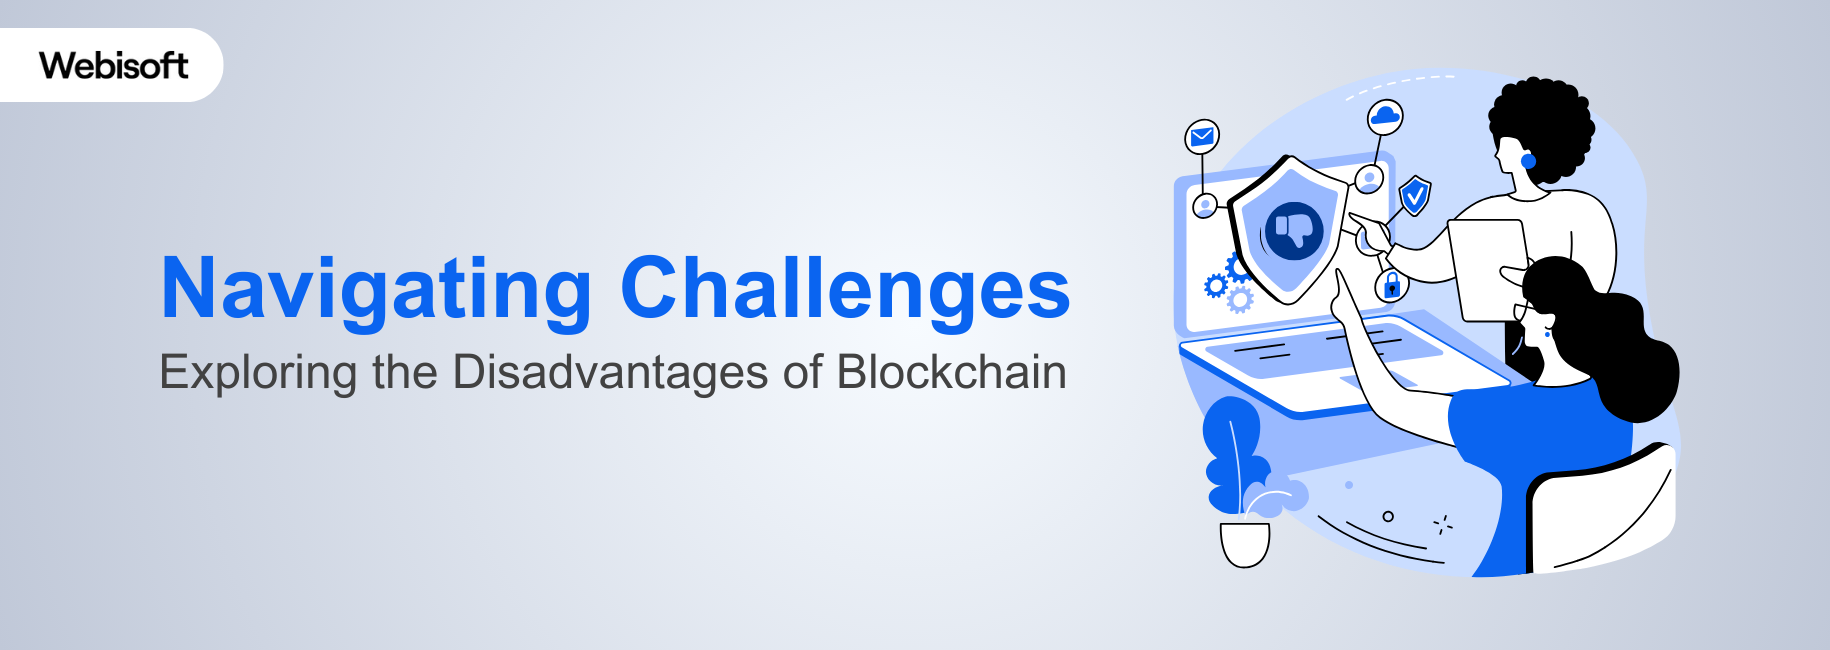 Navigating Challenges Exploring the Disadvantages of Blockchain